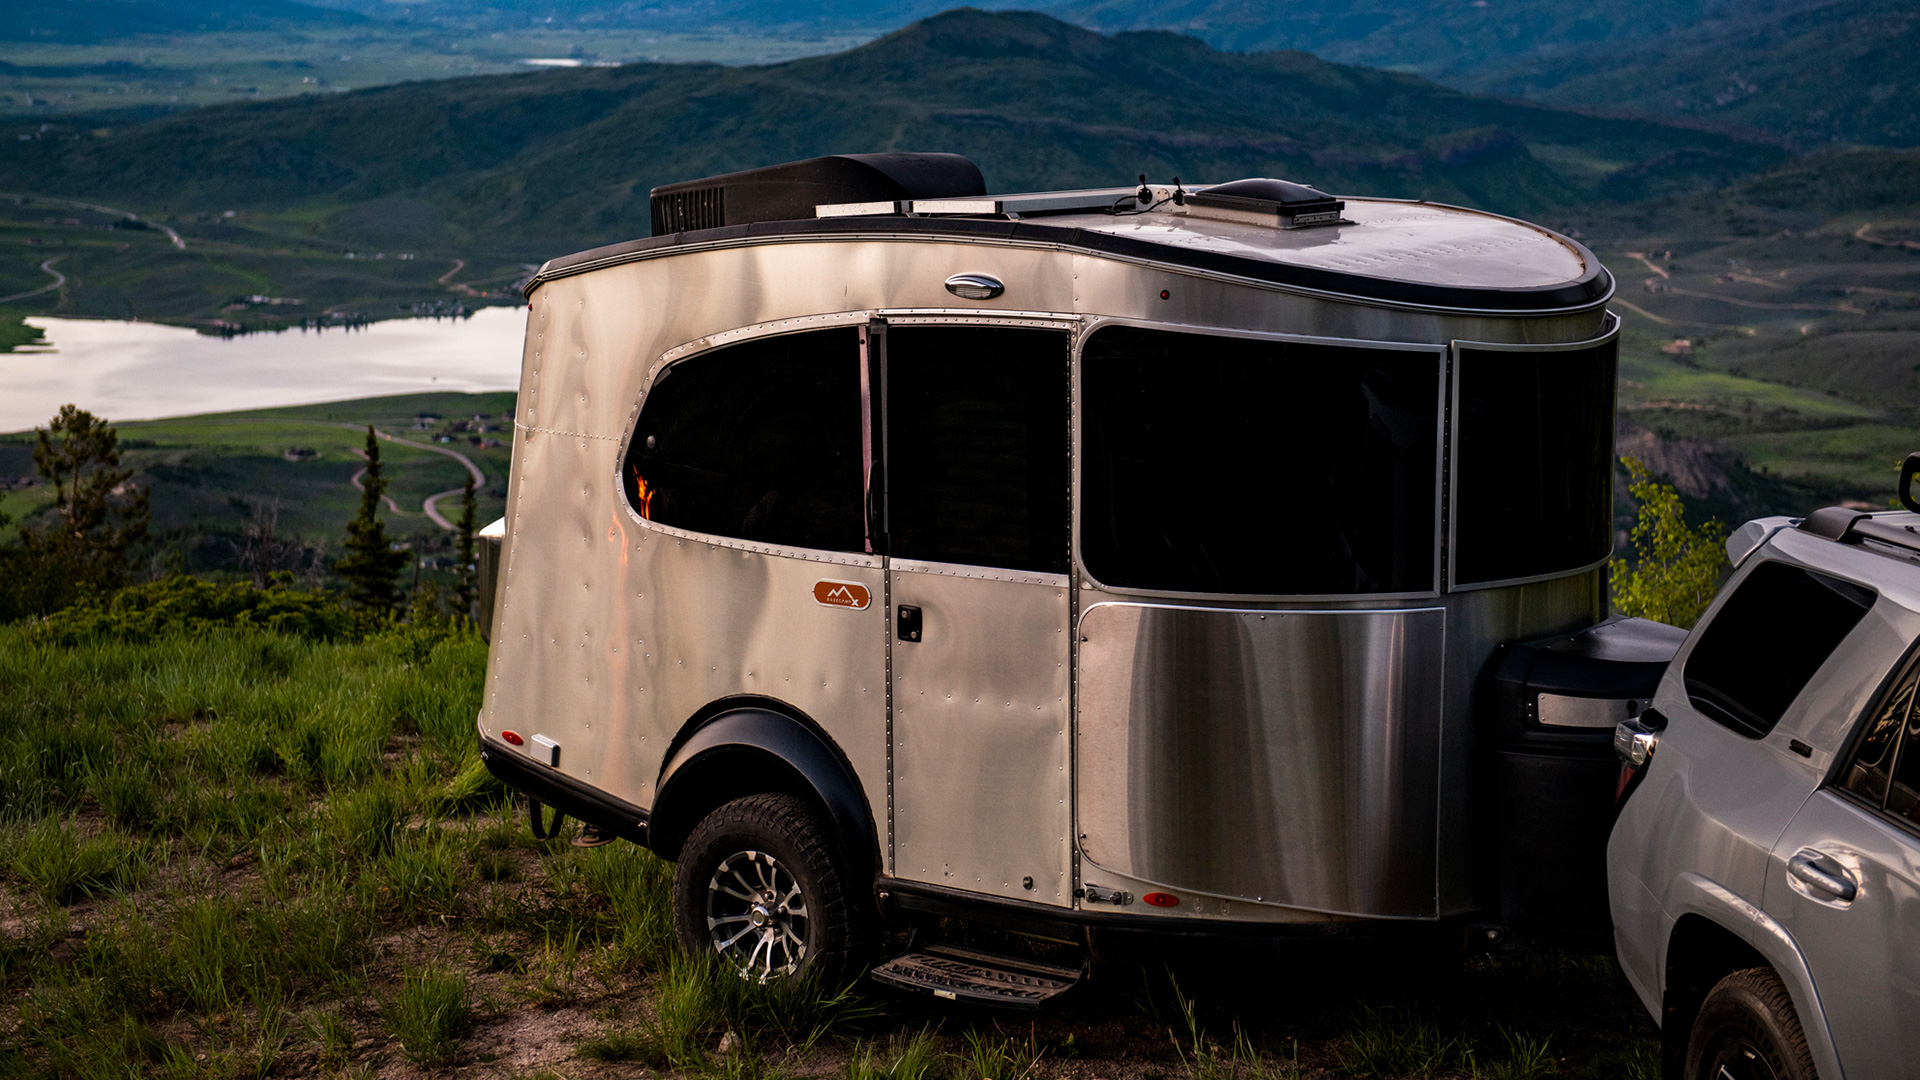 Airstream Basecamp X off-road camping trailer